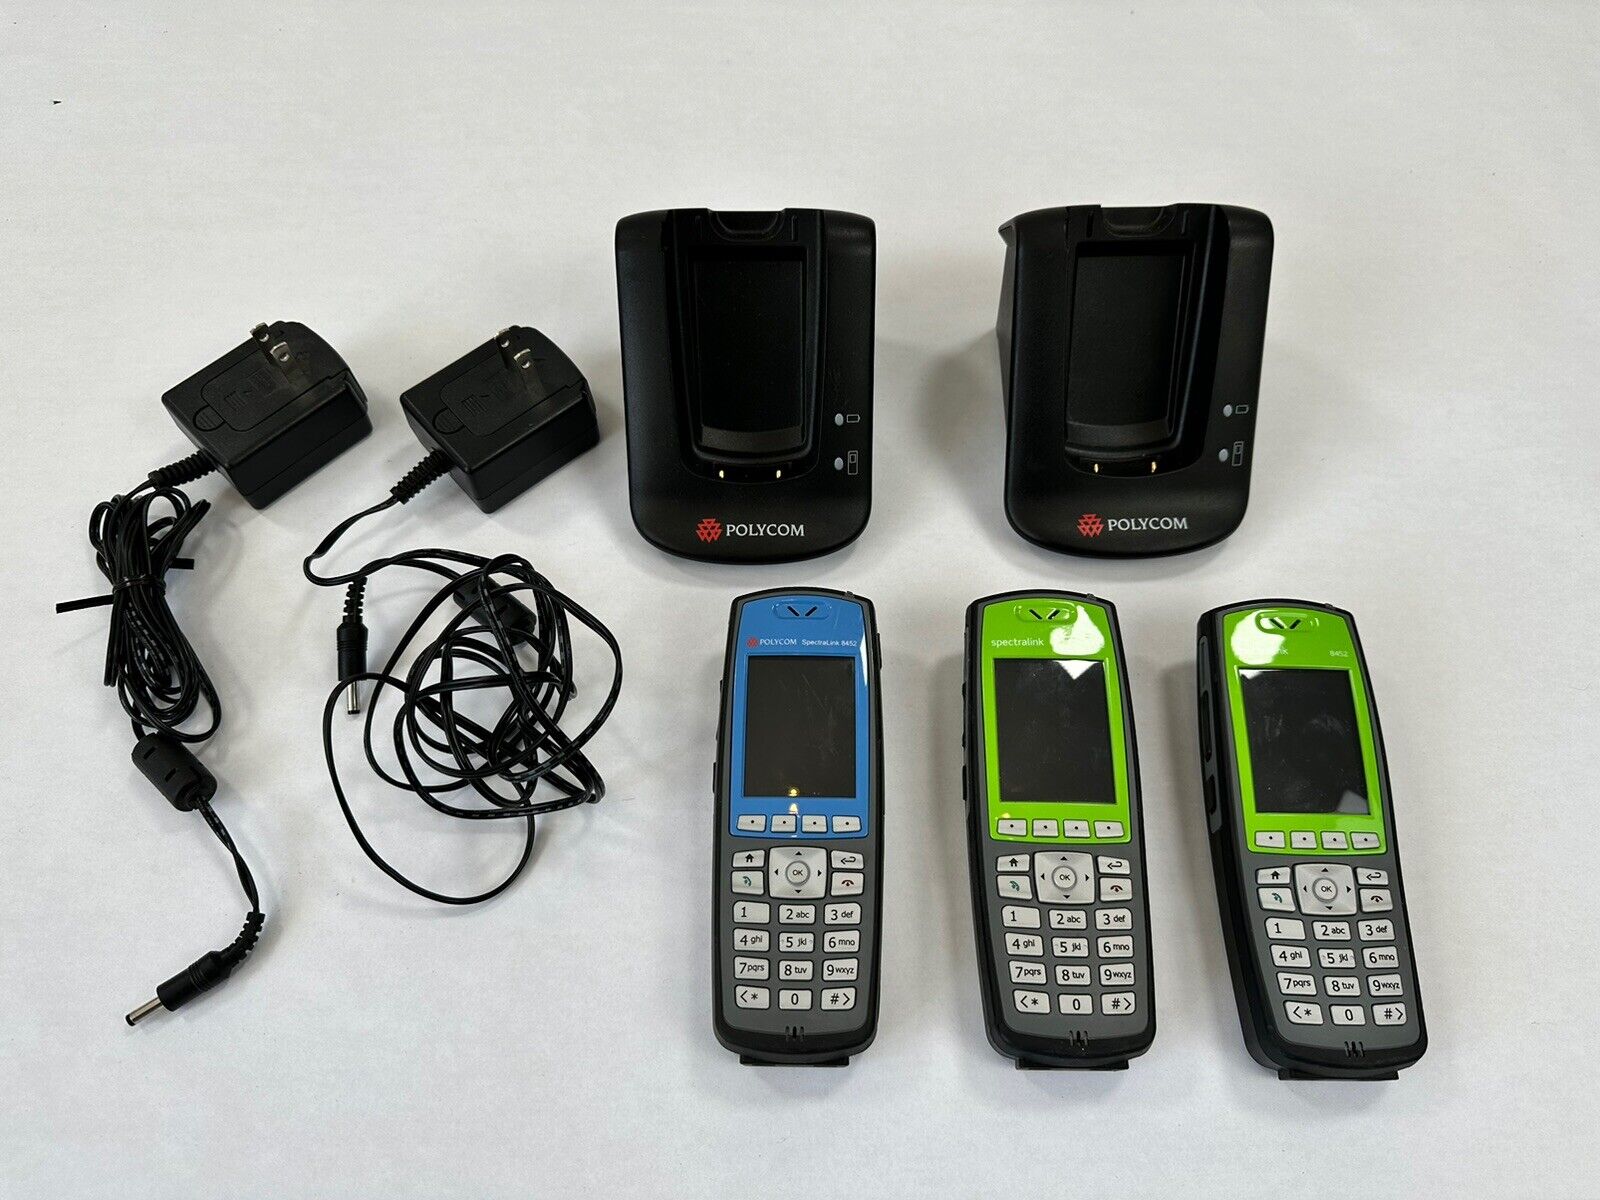 LOT OF 3 Spectralink Polycom 8452 Wireless Handset Phone w/ 2 8400 chargers